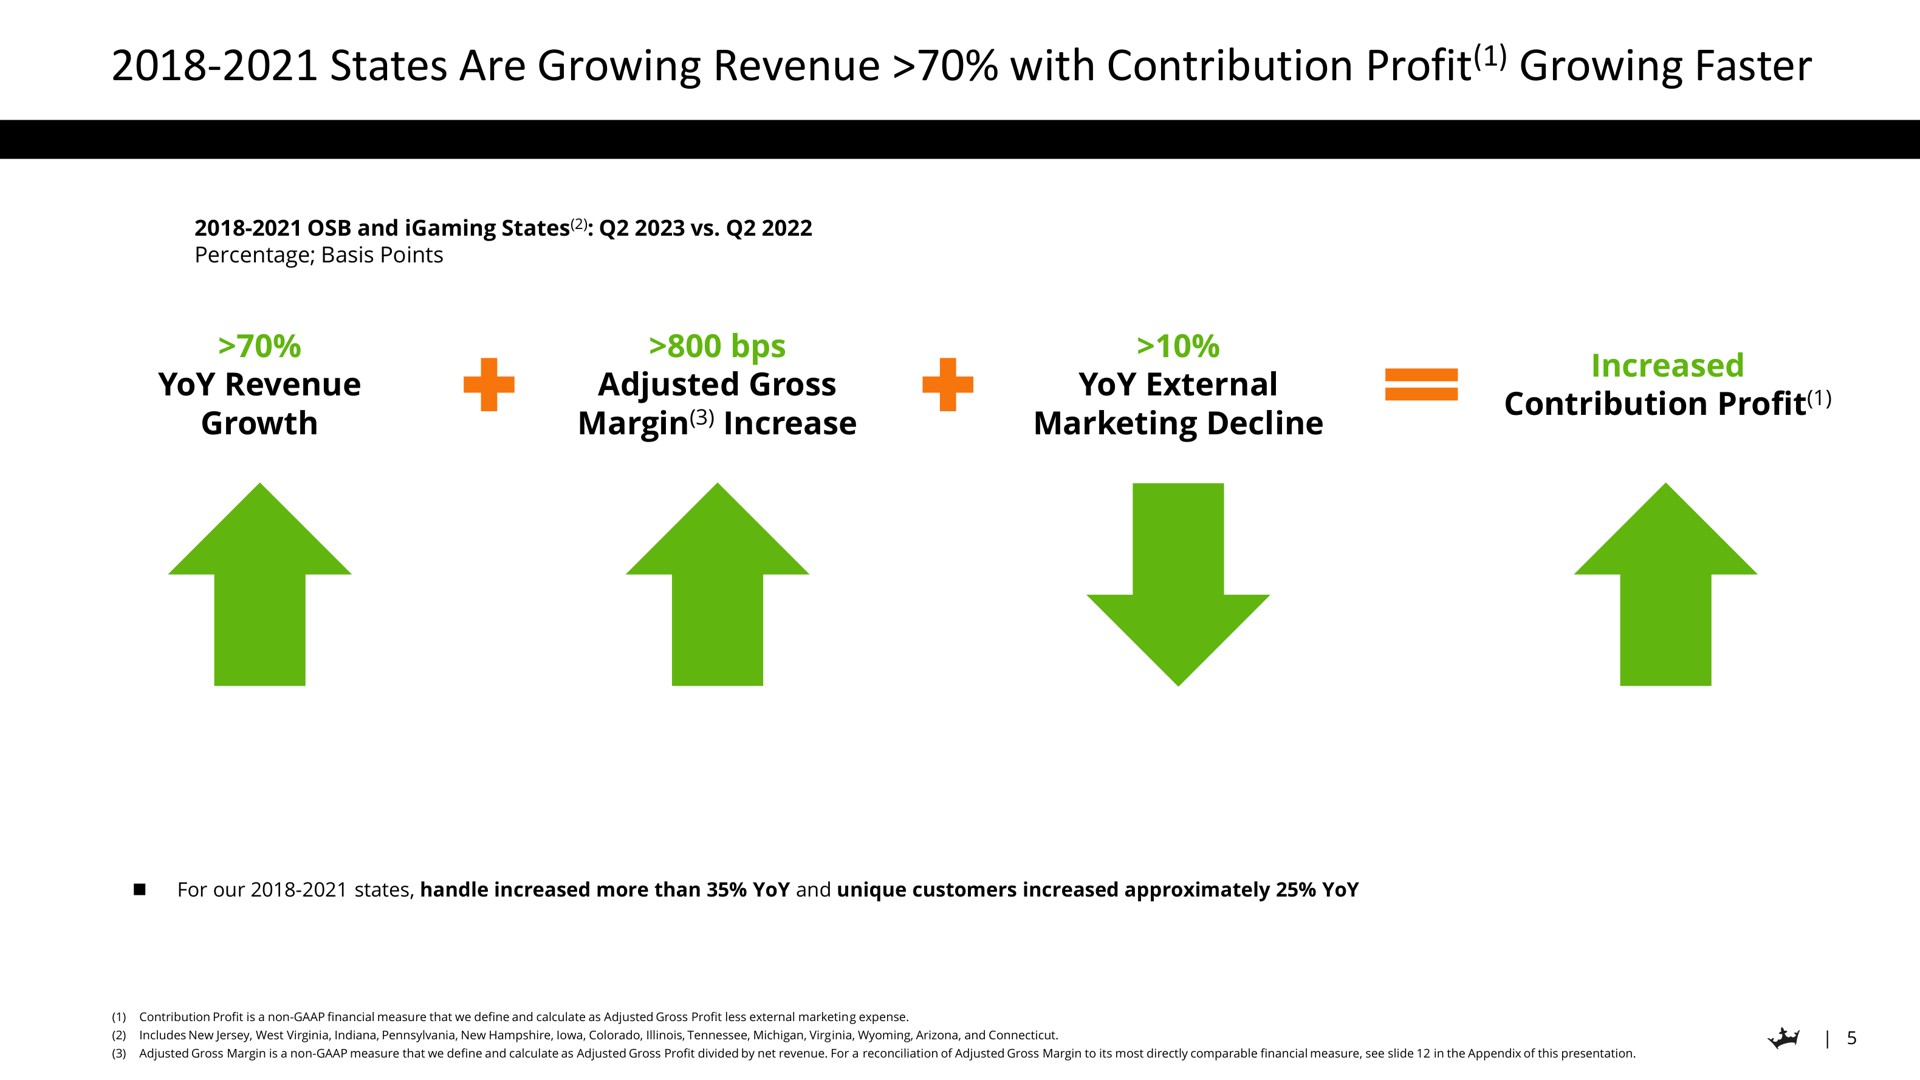 states are growing revenue with contribution profit growing faster | DraftKings